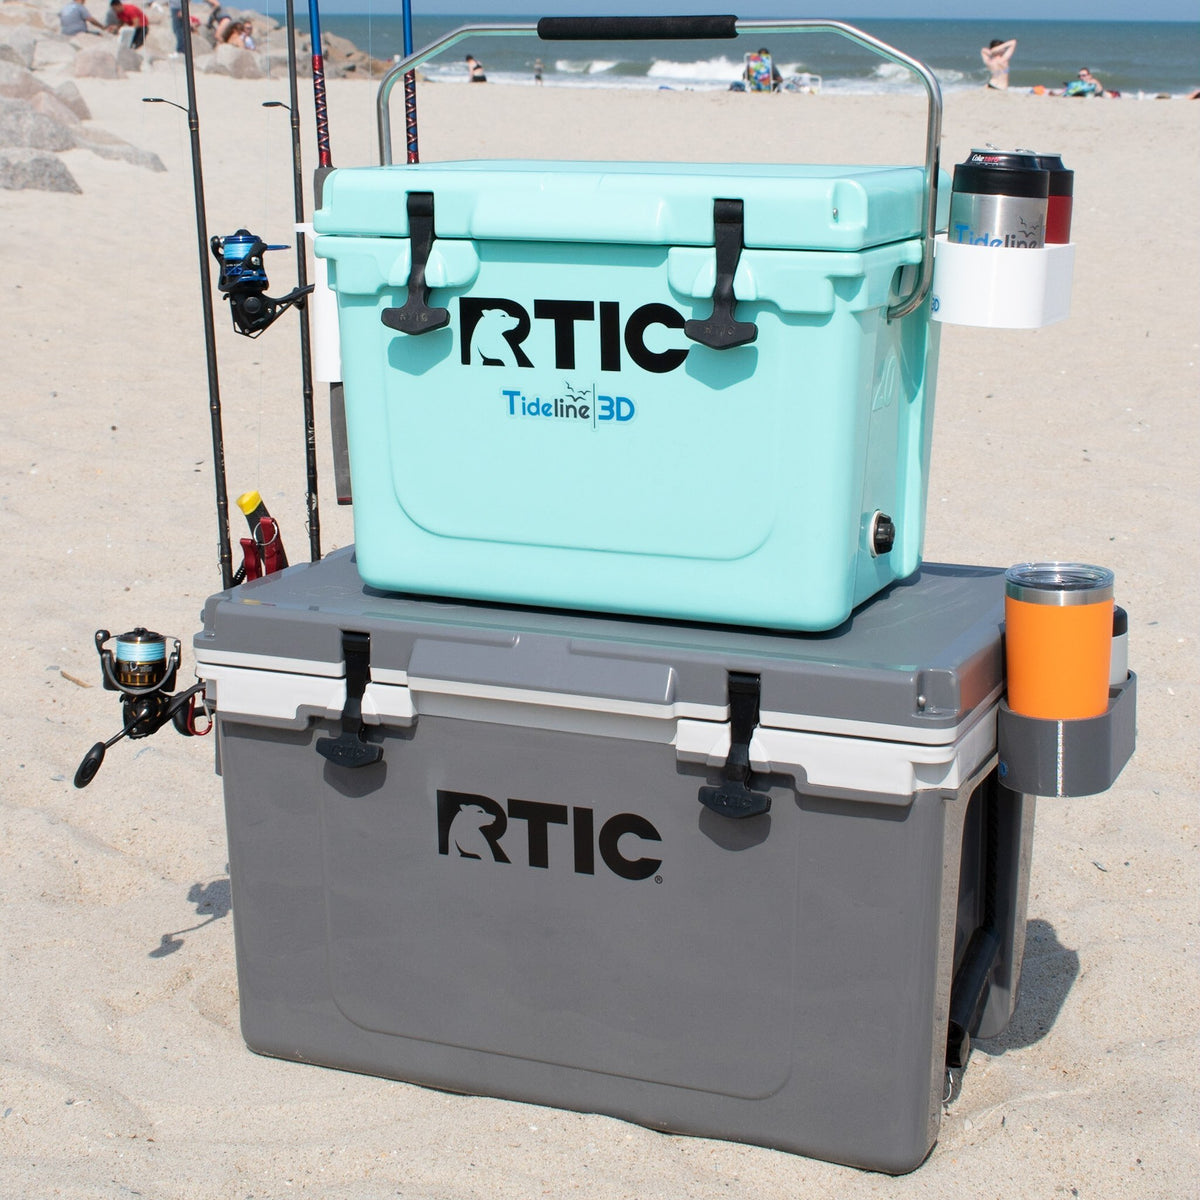 Guarantee Pay secure Fishing Rod Holder for RTIC Coolers – Tideline3D, rtic  45